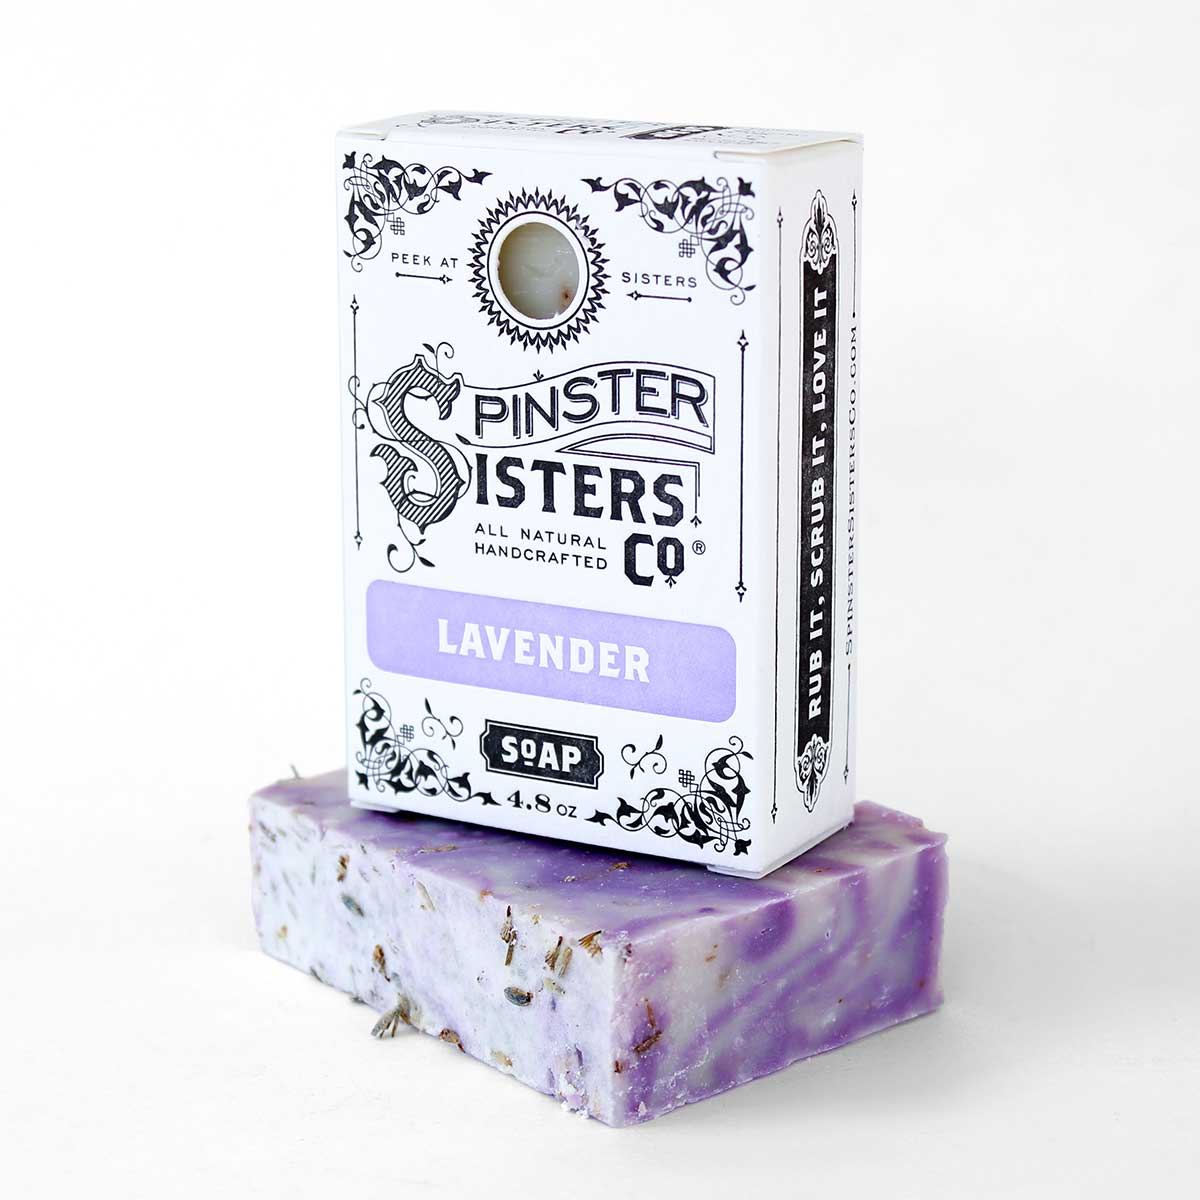 A bar of Spinster Sisters Bath Soap - Lavender with Lavender Blossoms topped with dried lavender pieces, placed next to its packaging. The black and white box features ornate designs and the text "Spinster Sisters Co. All Natural Handcrafted.